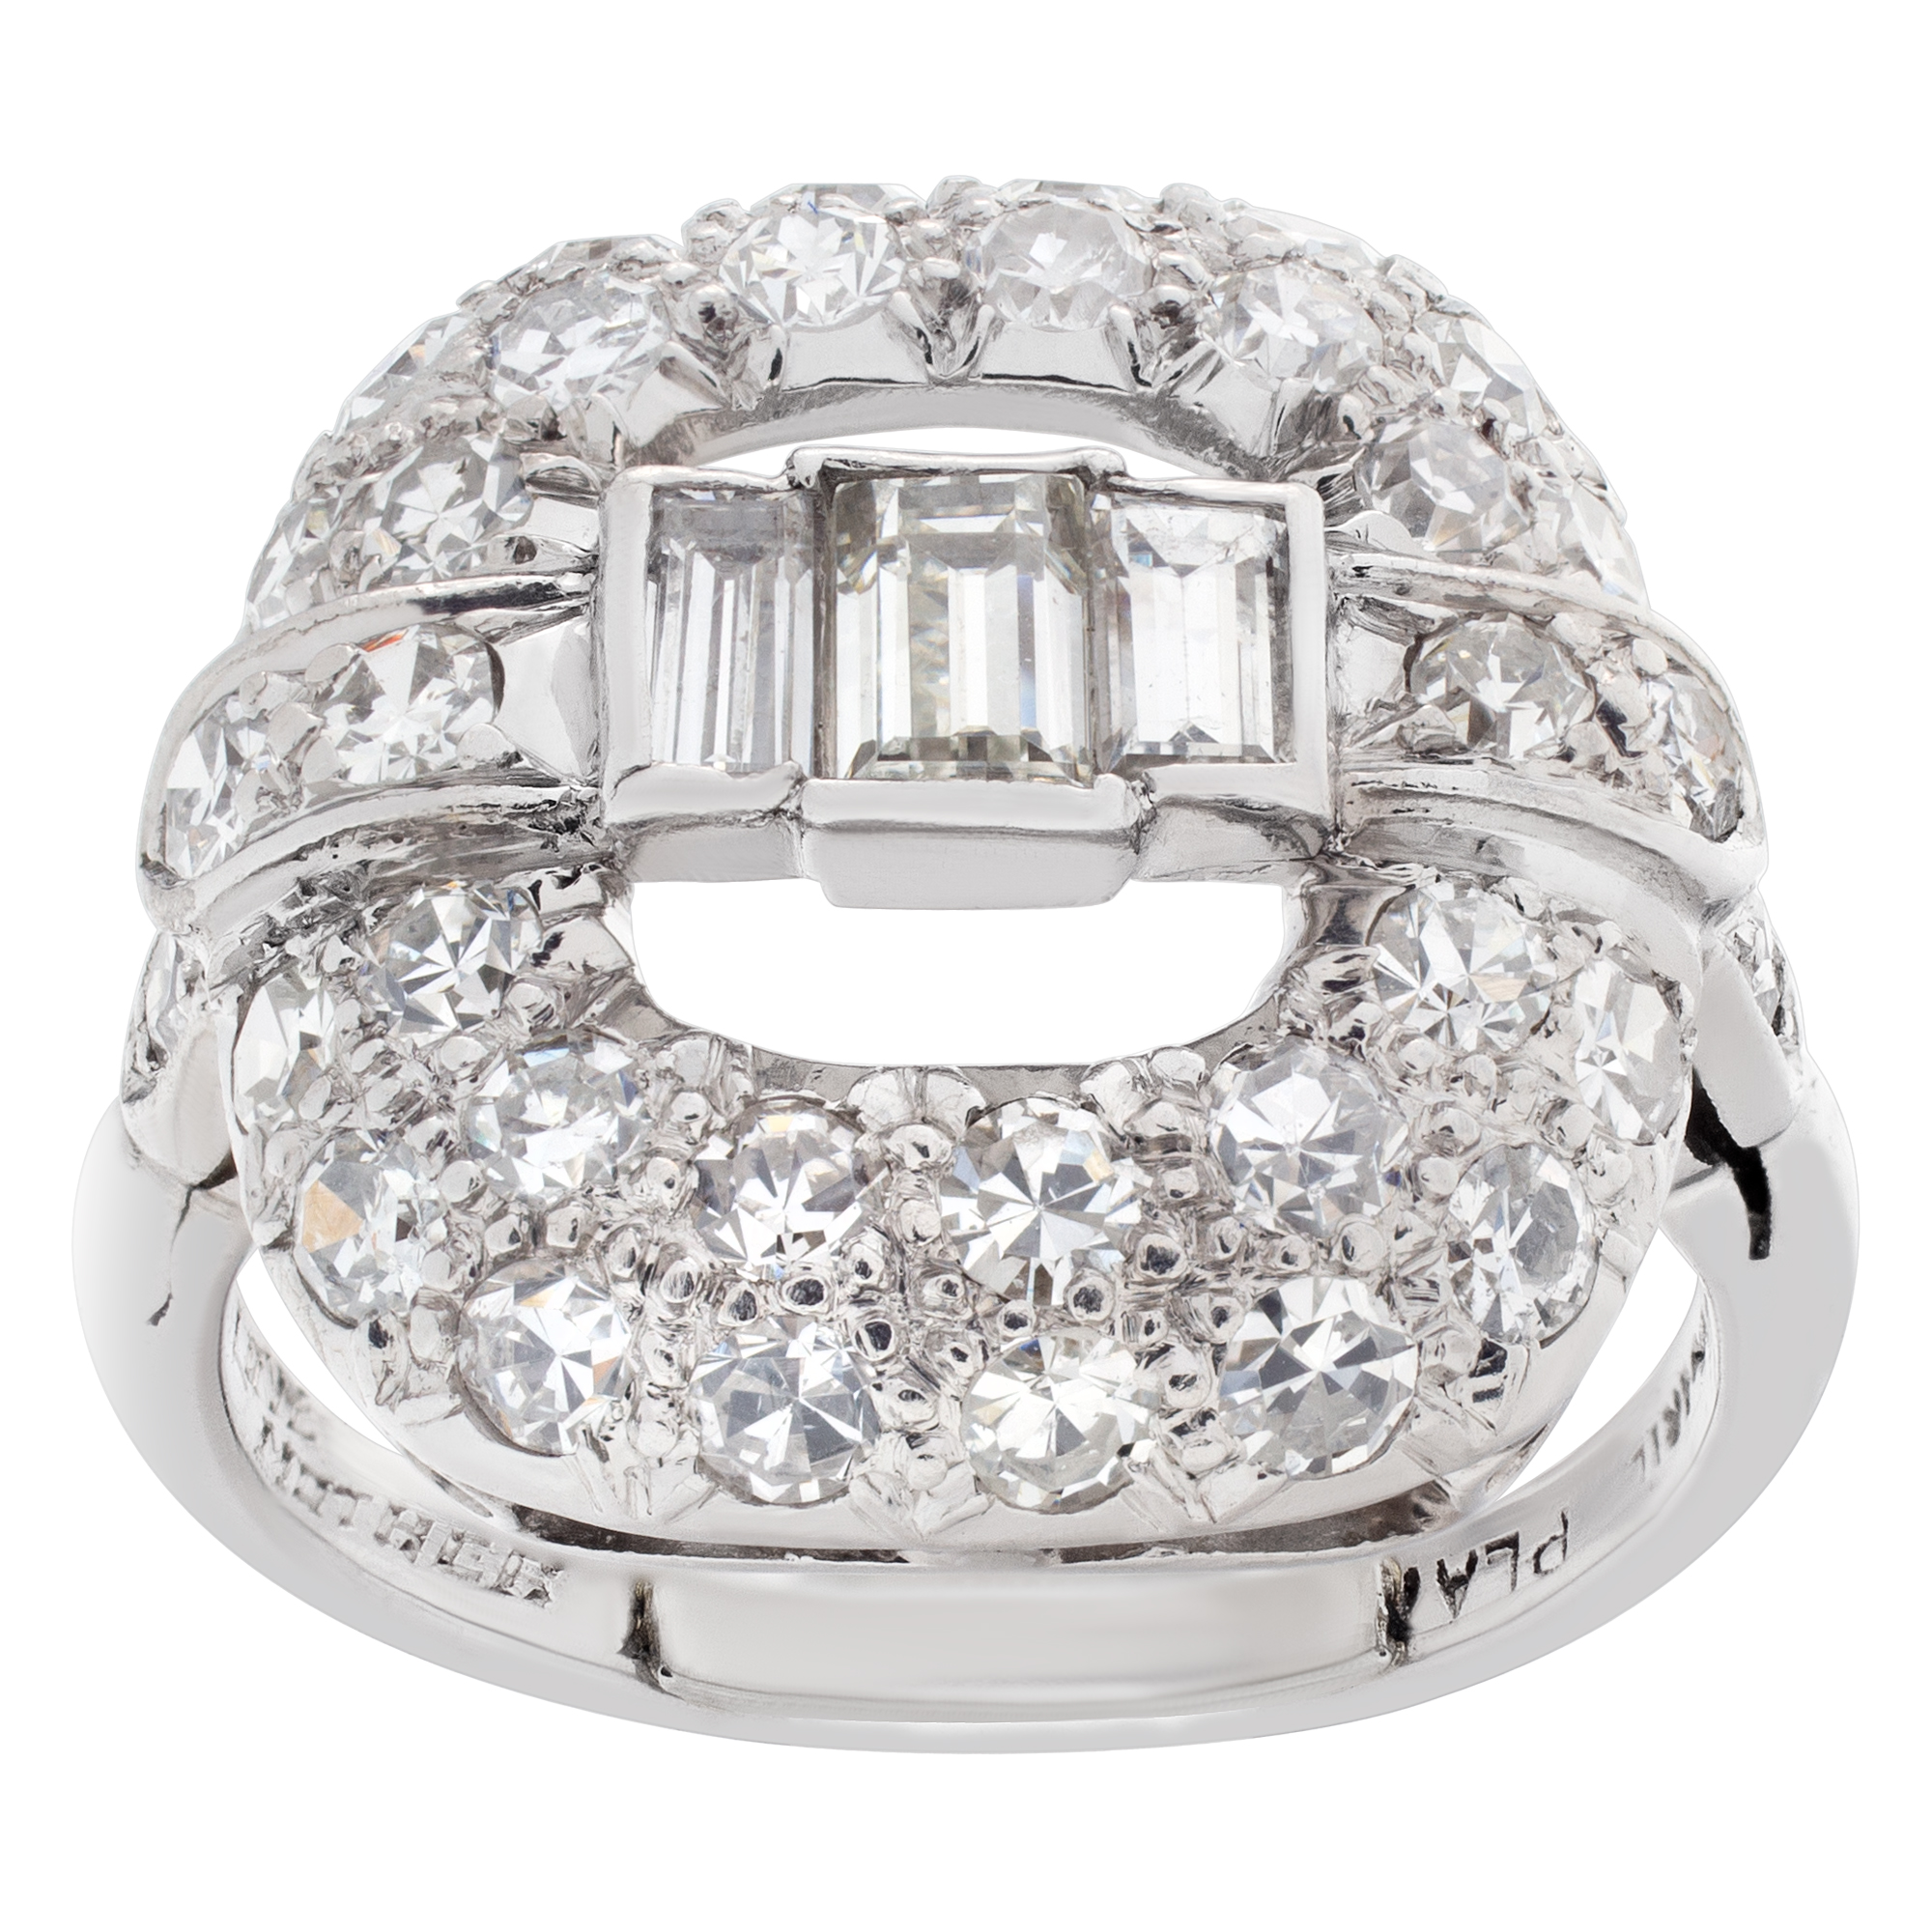 Vintage Platinum diamond ring with approximately 0.88 carats in diamonds. image 1